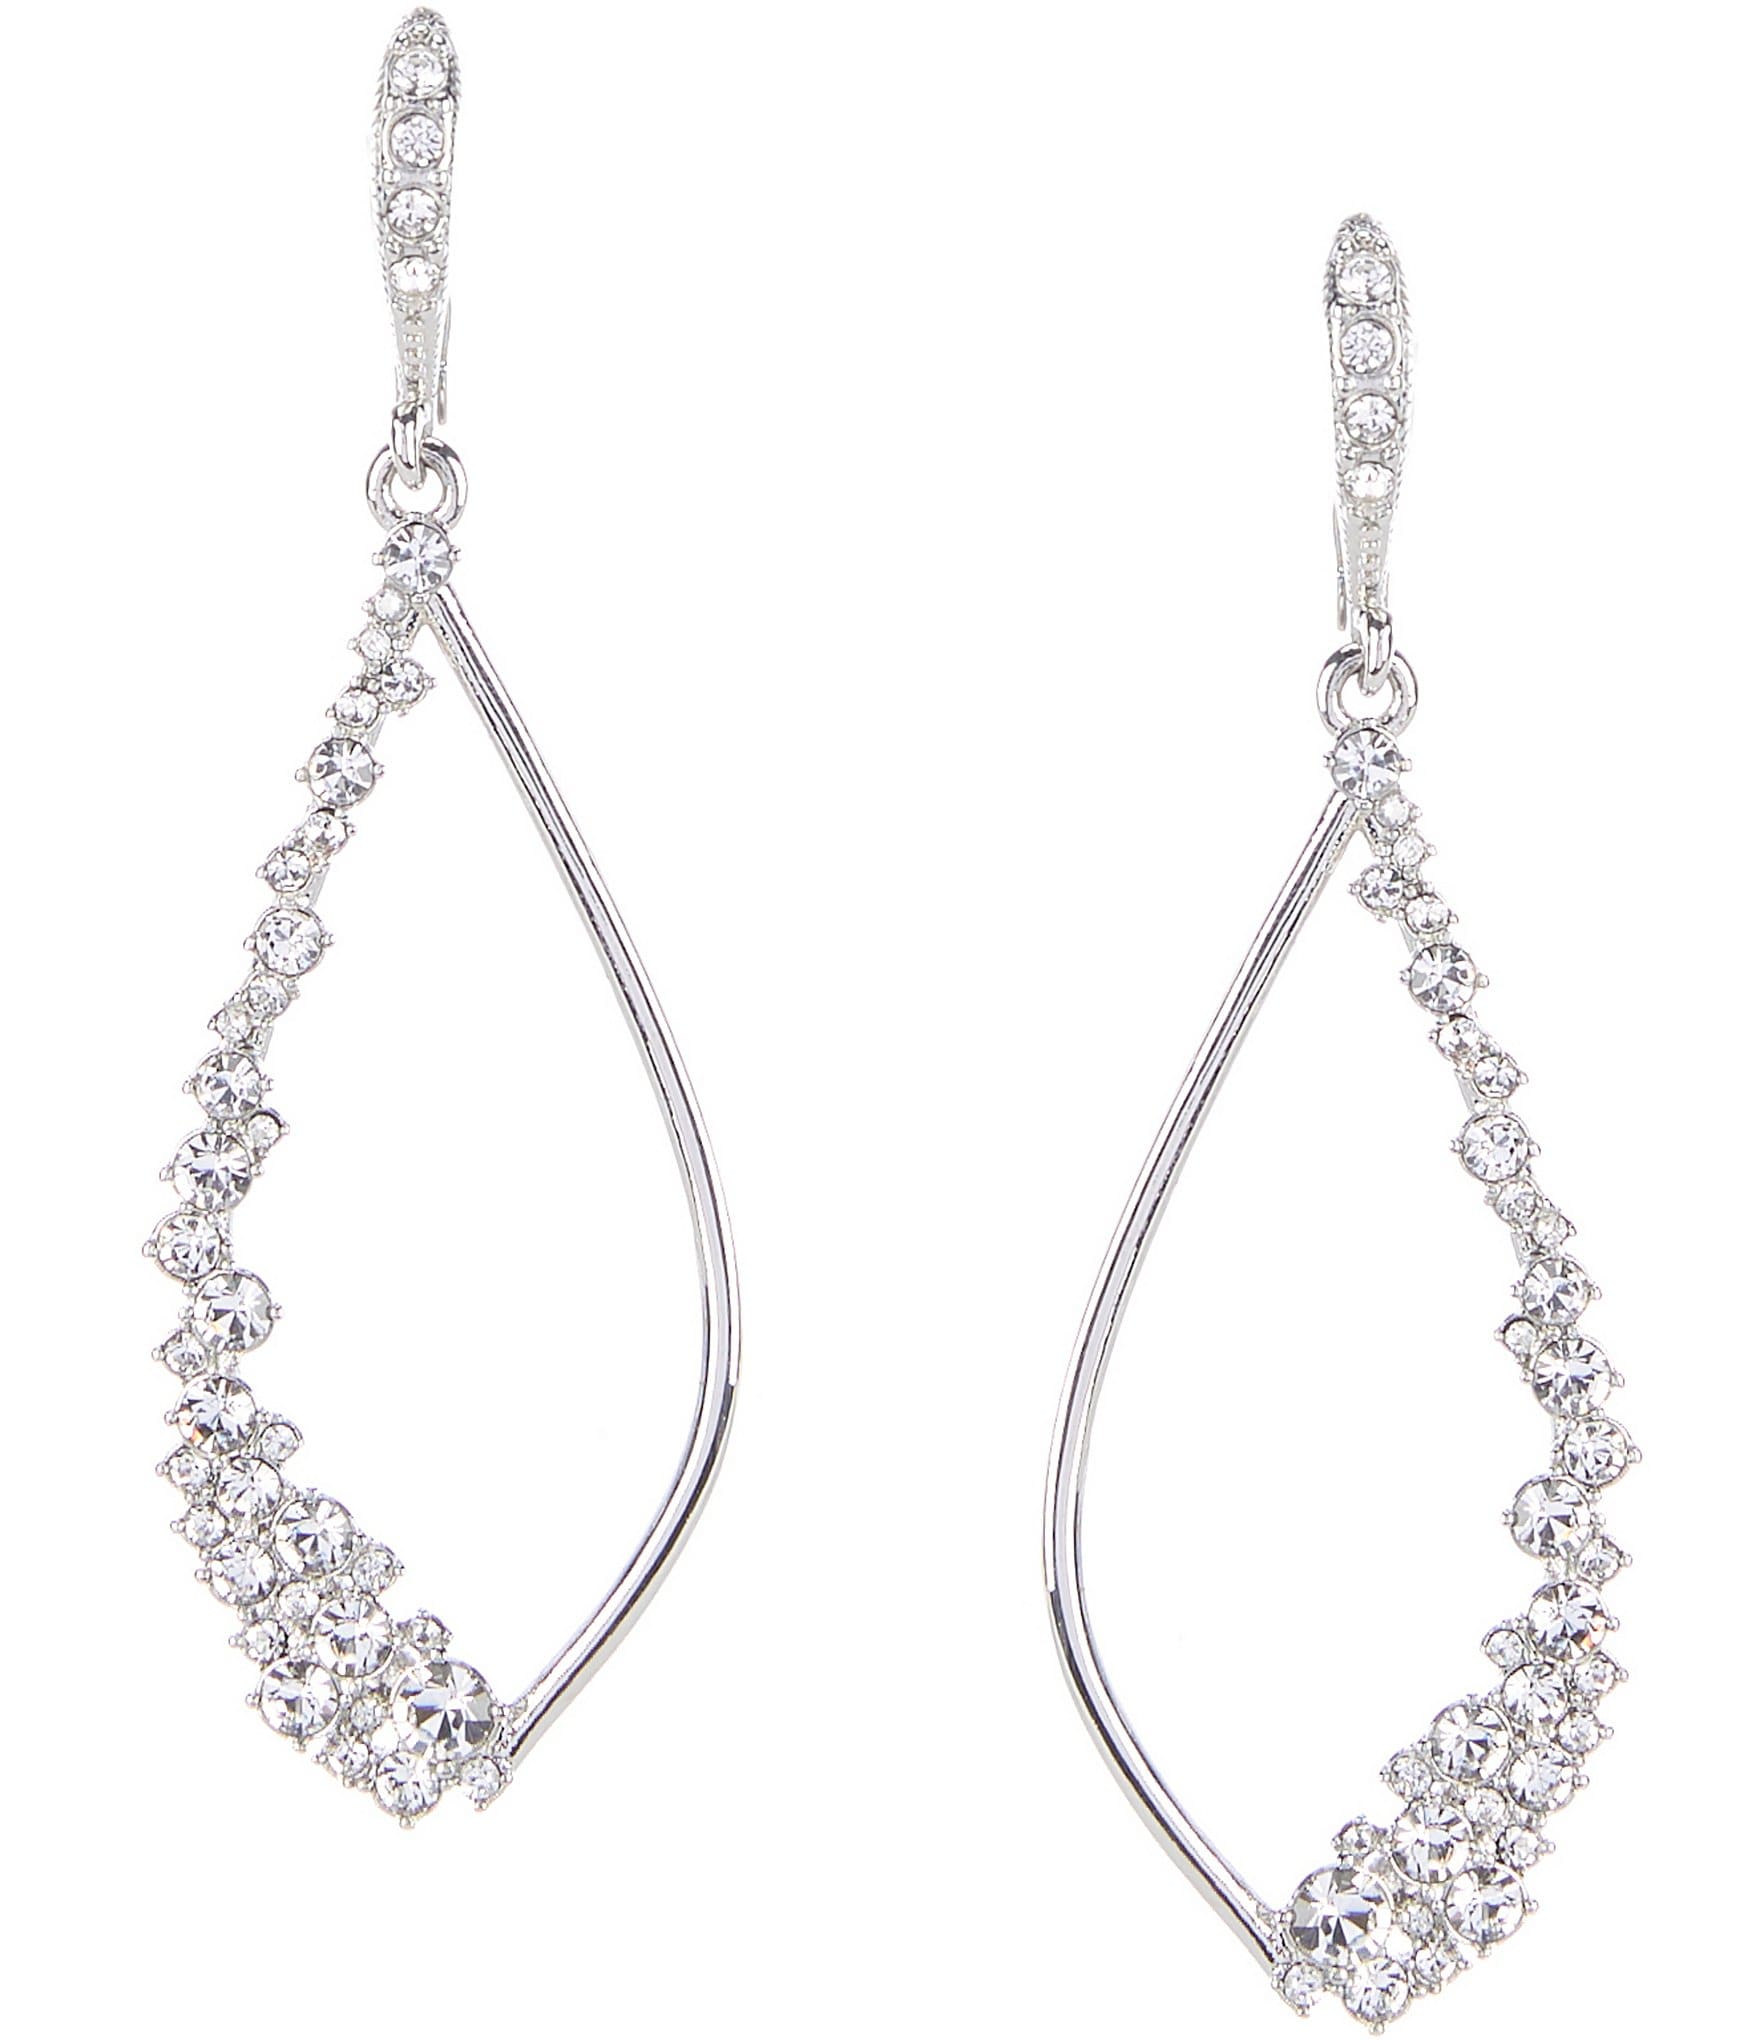 Givenchy Open Drop Crystal Earrings at Von Maur